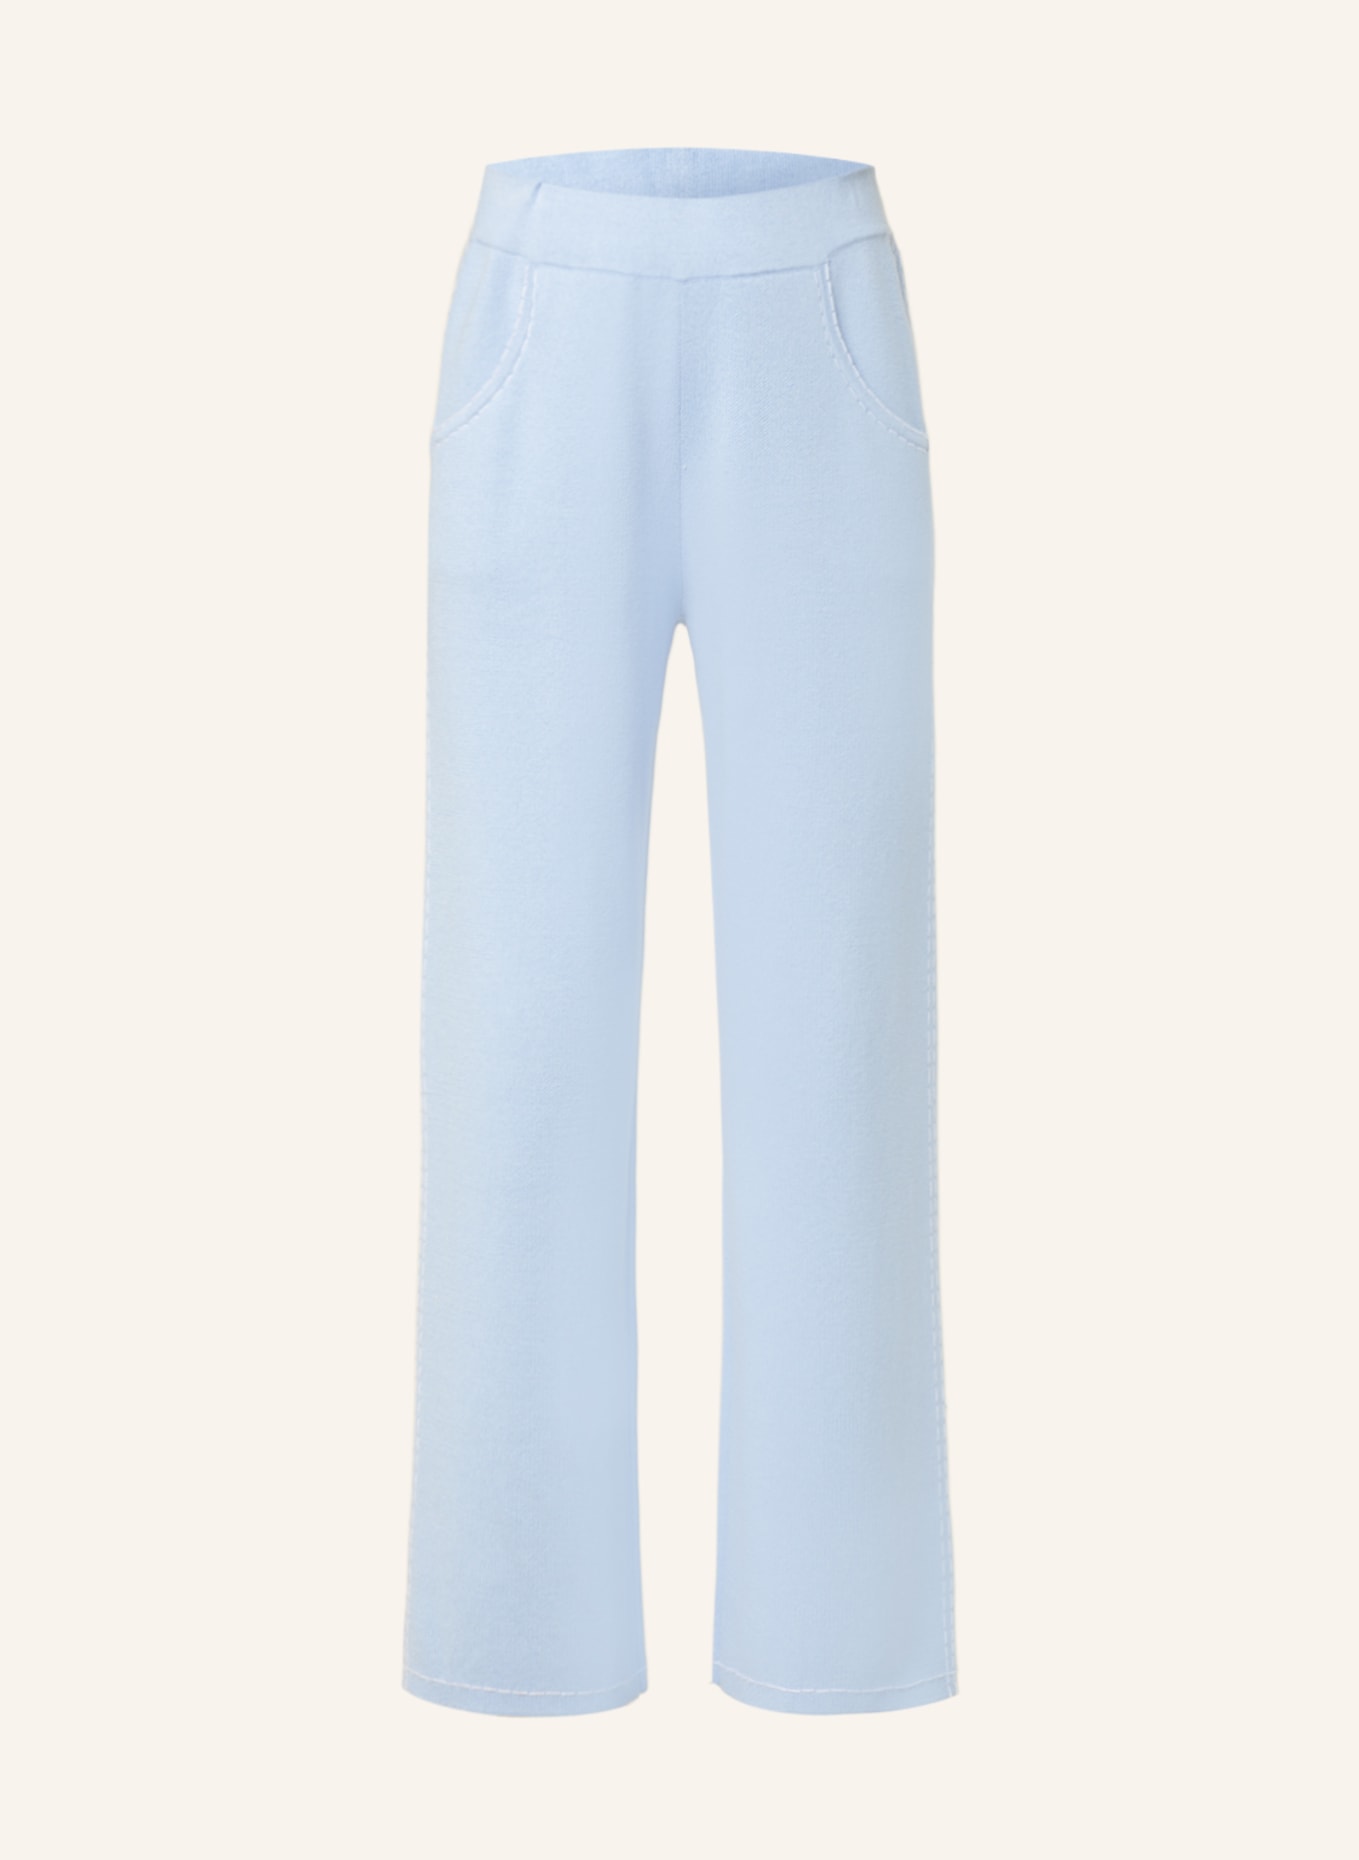 (THE MERCER) N.Y. Knit trousers, Color: LIGHT BLUE (Image 1)